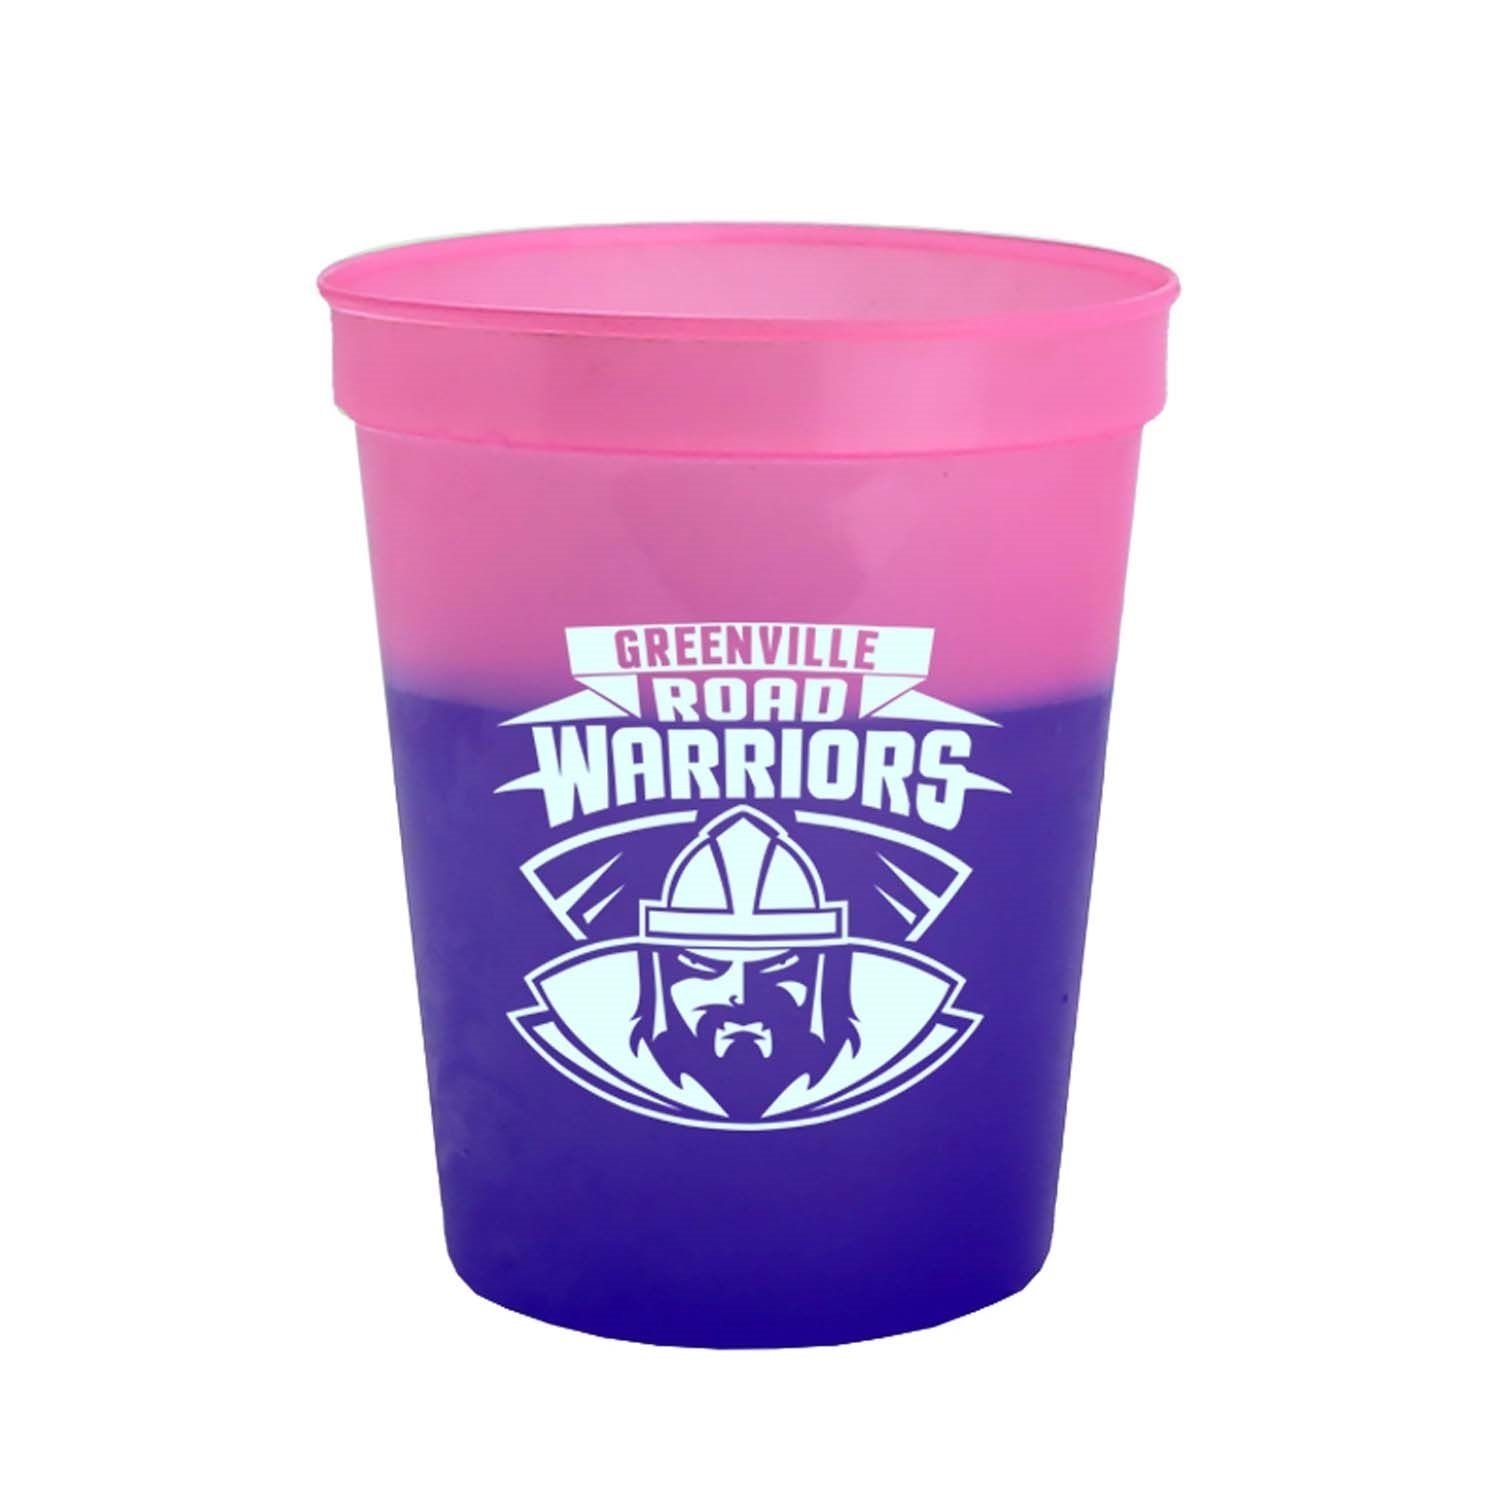 How can I get custom stadium cups for my event?